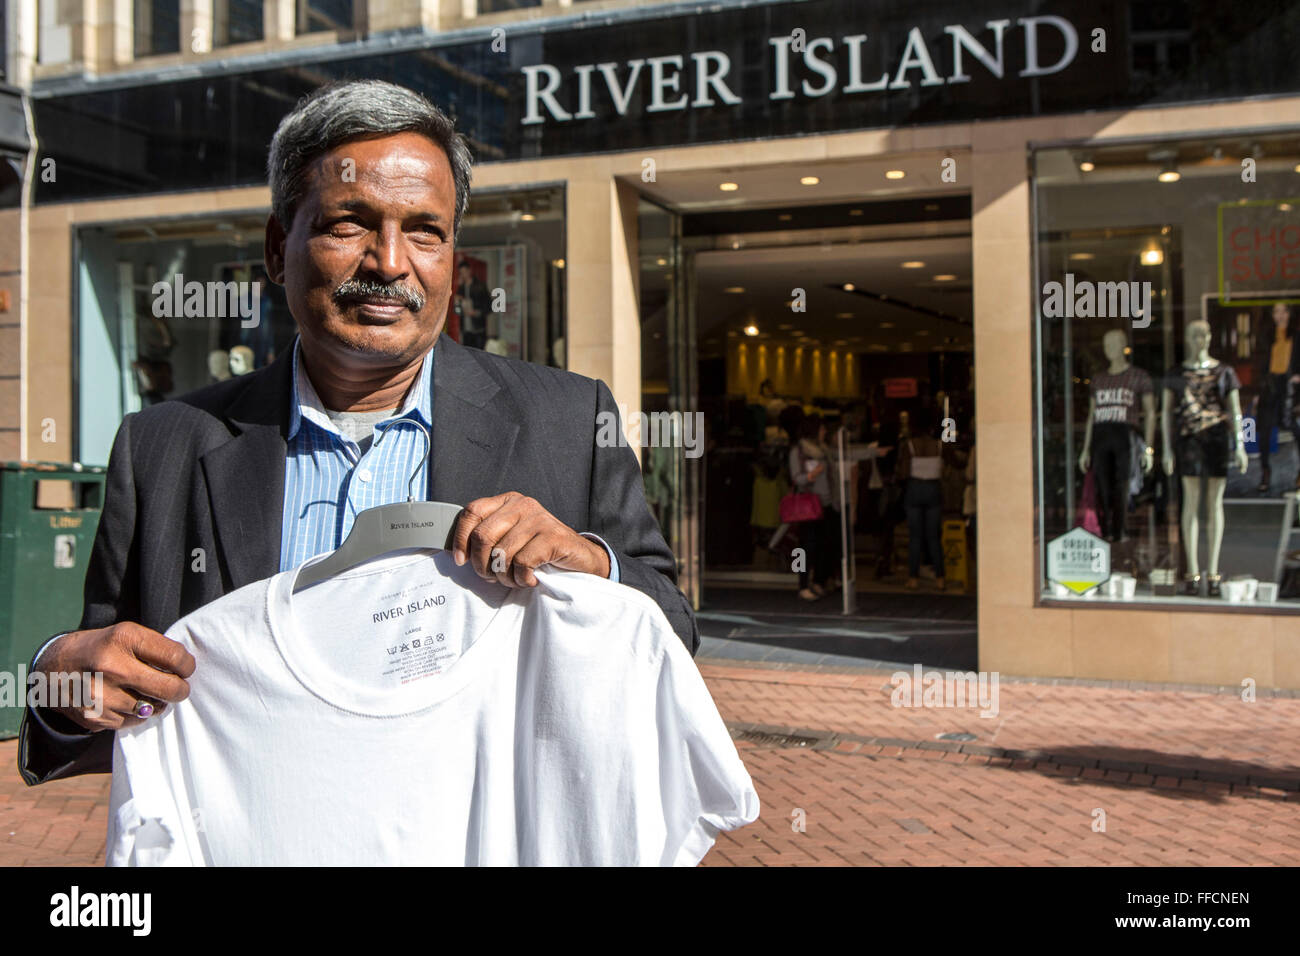 Amirul Haque Amir, President of Bangladeshi Federation of Garment Workers, outside River Island in Bournemouth, Dorset, United Kingdom. Stock Photo